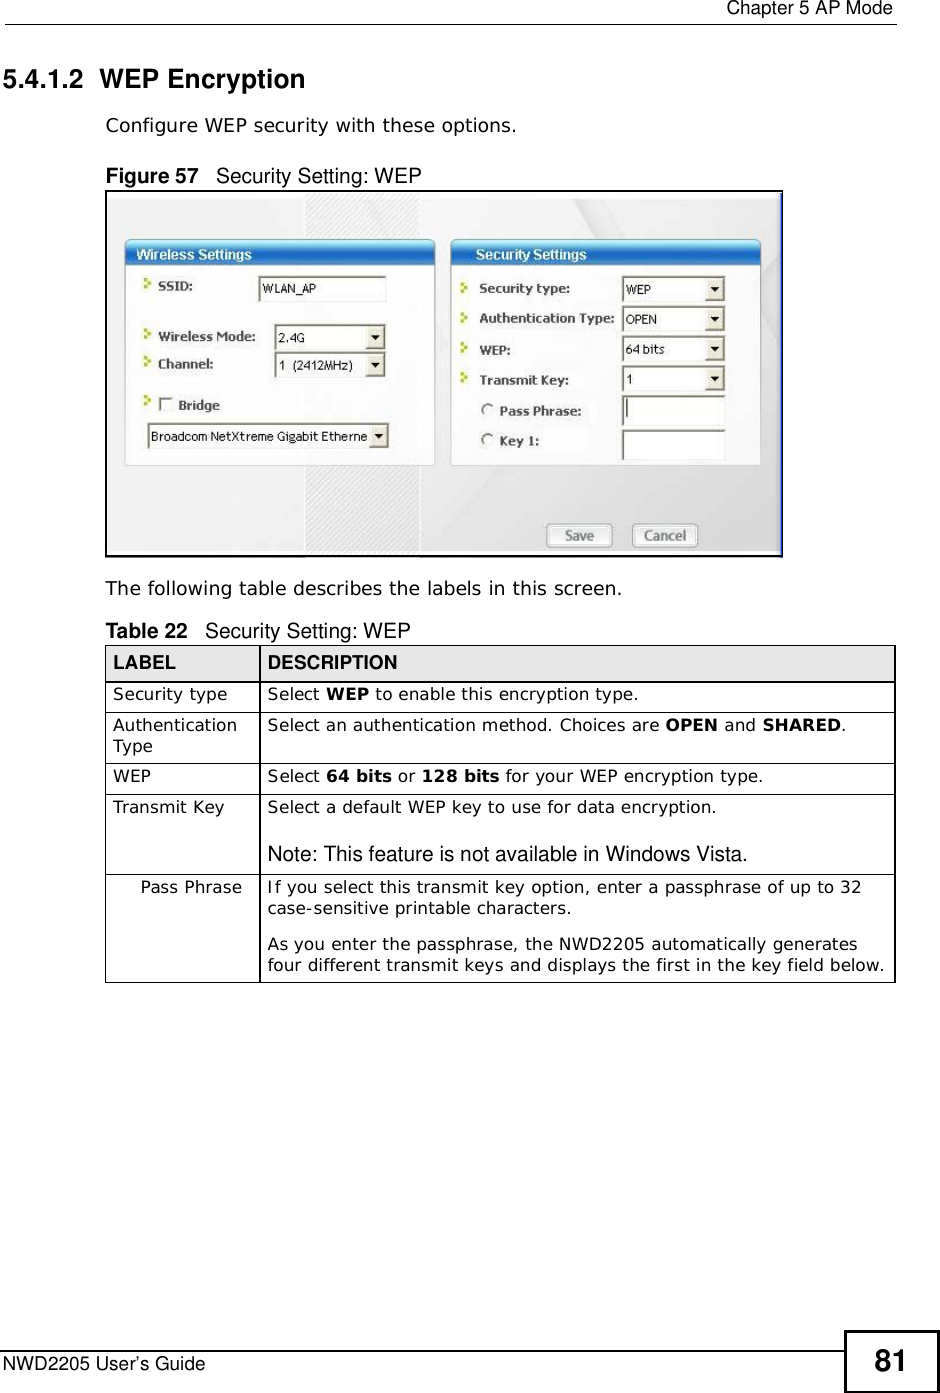  Chapter 5AP ModeNWD2205 User’s Guide 815.4.1.2  WEP EncryptionConfigure WEP security with these options. Figure 57   Security Setting: WEPThe following table describes the labels in this screen.  Table 22   Security Setting: WEP LABEL DESCRIPTIONSecurity typeSelect WEP to enable this encryption type.Authentication Type Select an authentication method. Choices are OPEN and SHARED.WEPSelect 64 bits or 128 bits for your WEP encryption type.Transmit KeySelect a default WEP key to use for data encryption.Note: This feature is not available in Windows Vista.Pass PhraseIf you select this transmit key option, enter a passphrase of up to 32 case-sensitive printable characters. As you enter the passphrase, the NWD2205 automatically generates four different transmit keys and displays the first in the key field below.